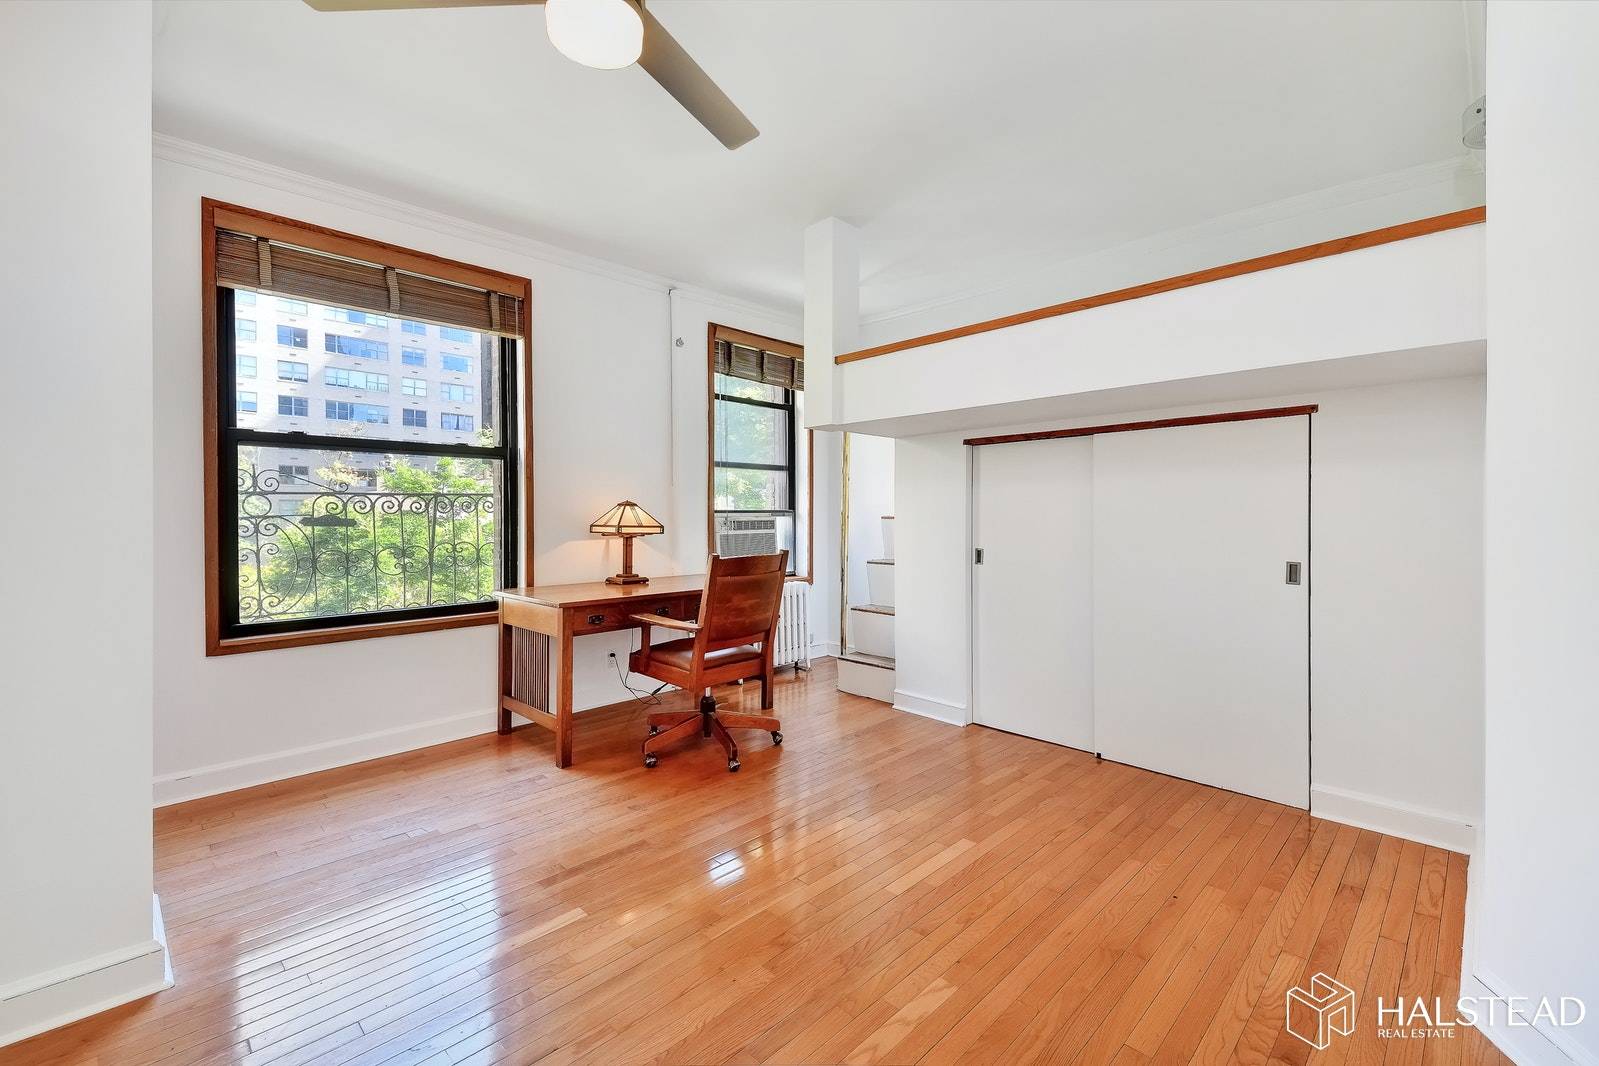 Top floor studio in a pre war Lenox Hill co op, this walk up apartment has wonderful northern light and views over townhouses and trees, offering all day light amp ...